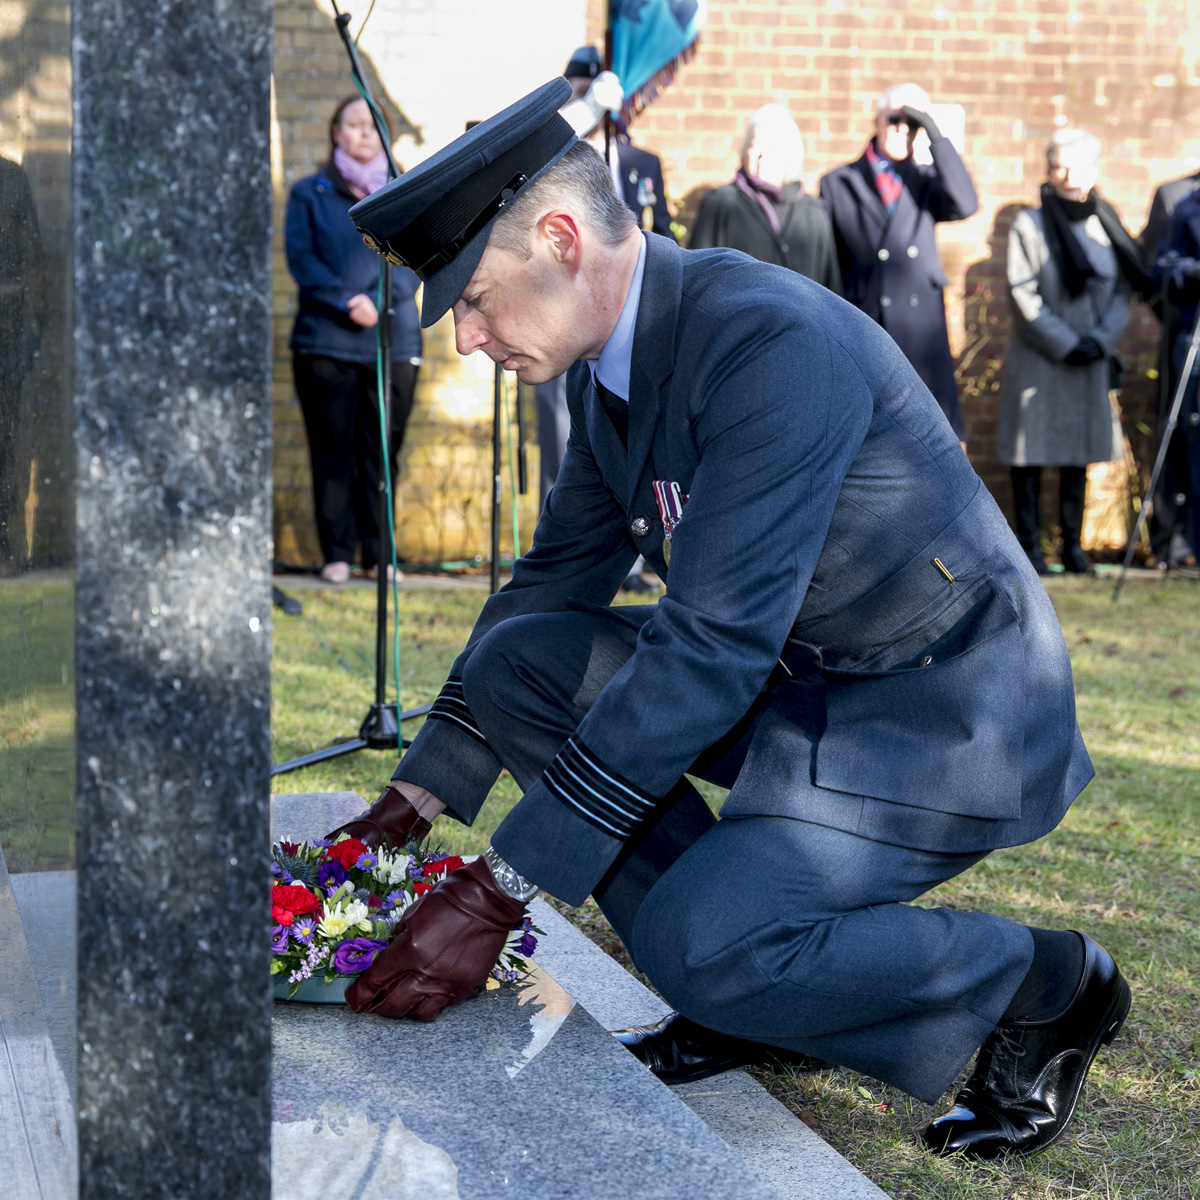 Personnel laying a wreath at the memorial.